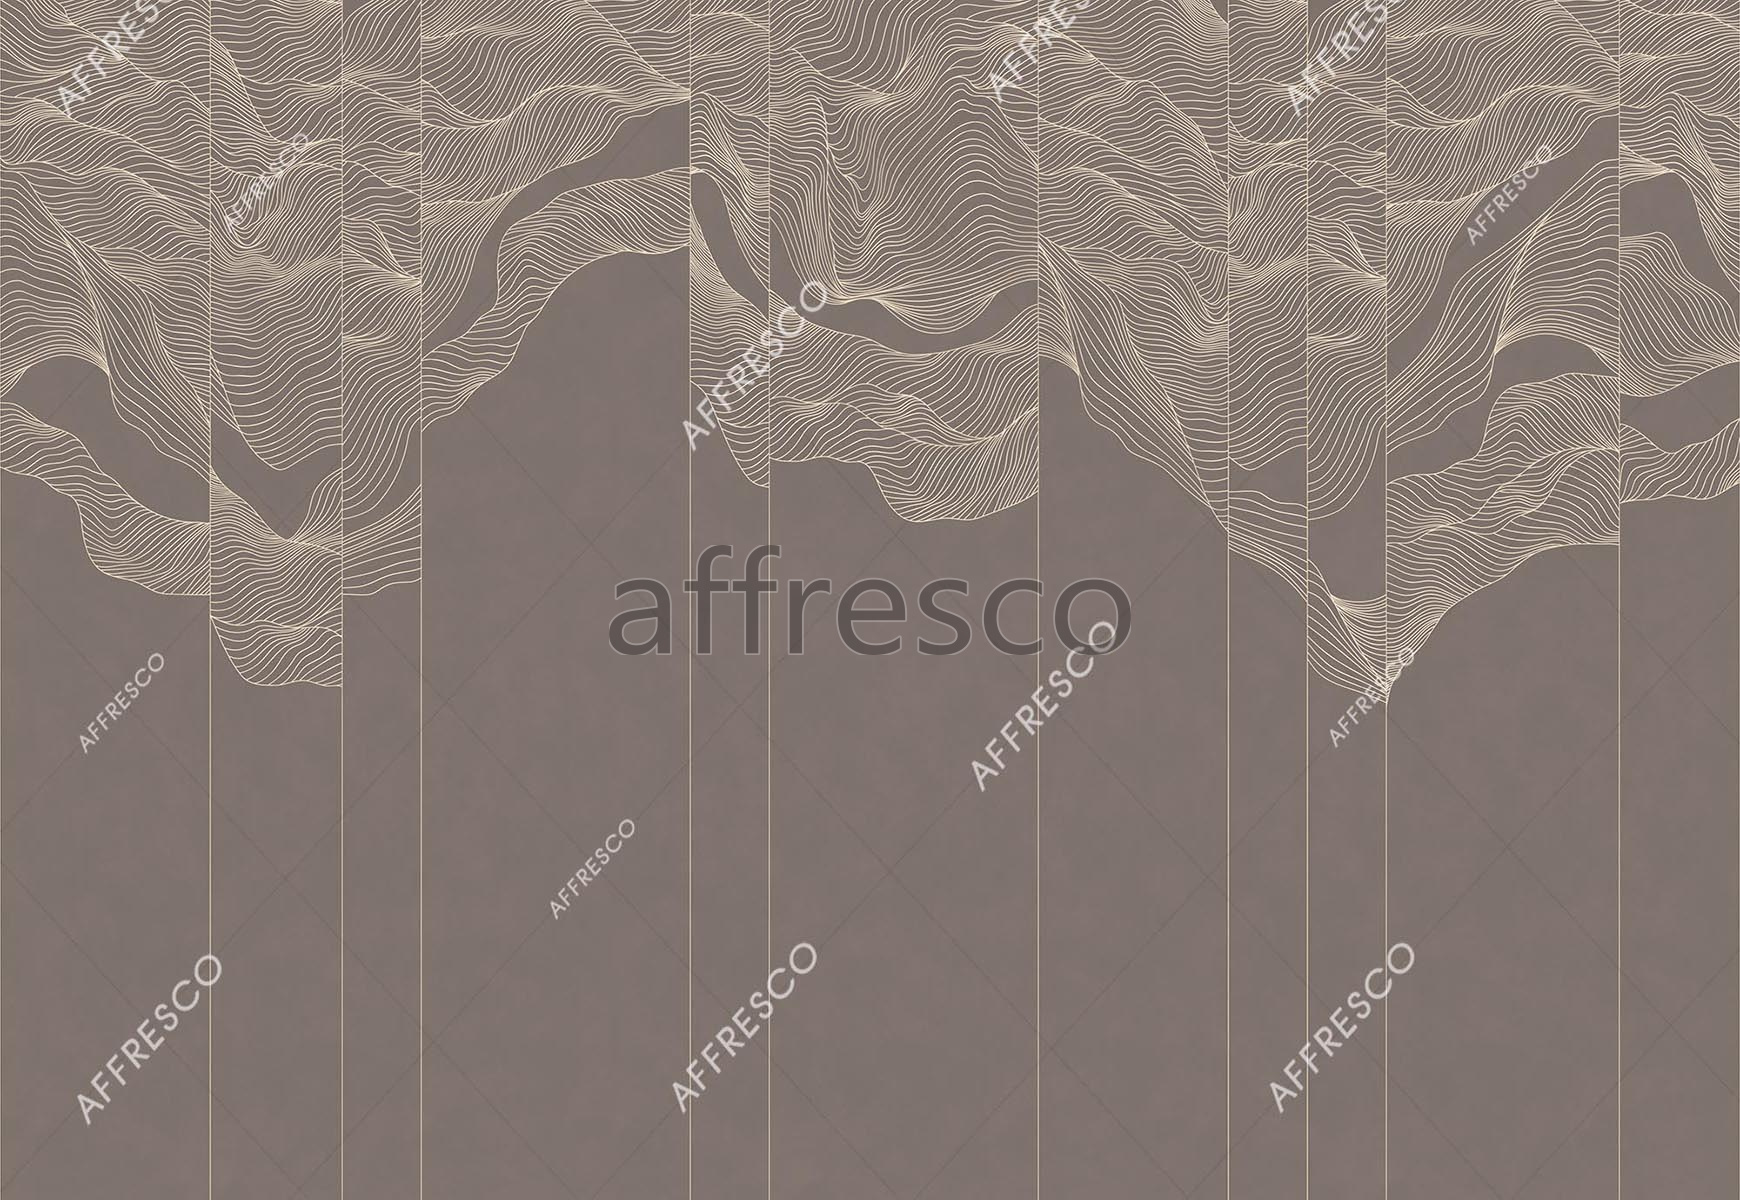 ID139254 | Textures | the oncoming wave | Affresco Factory